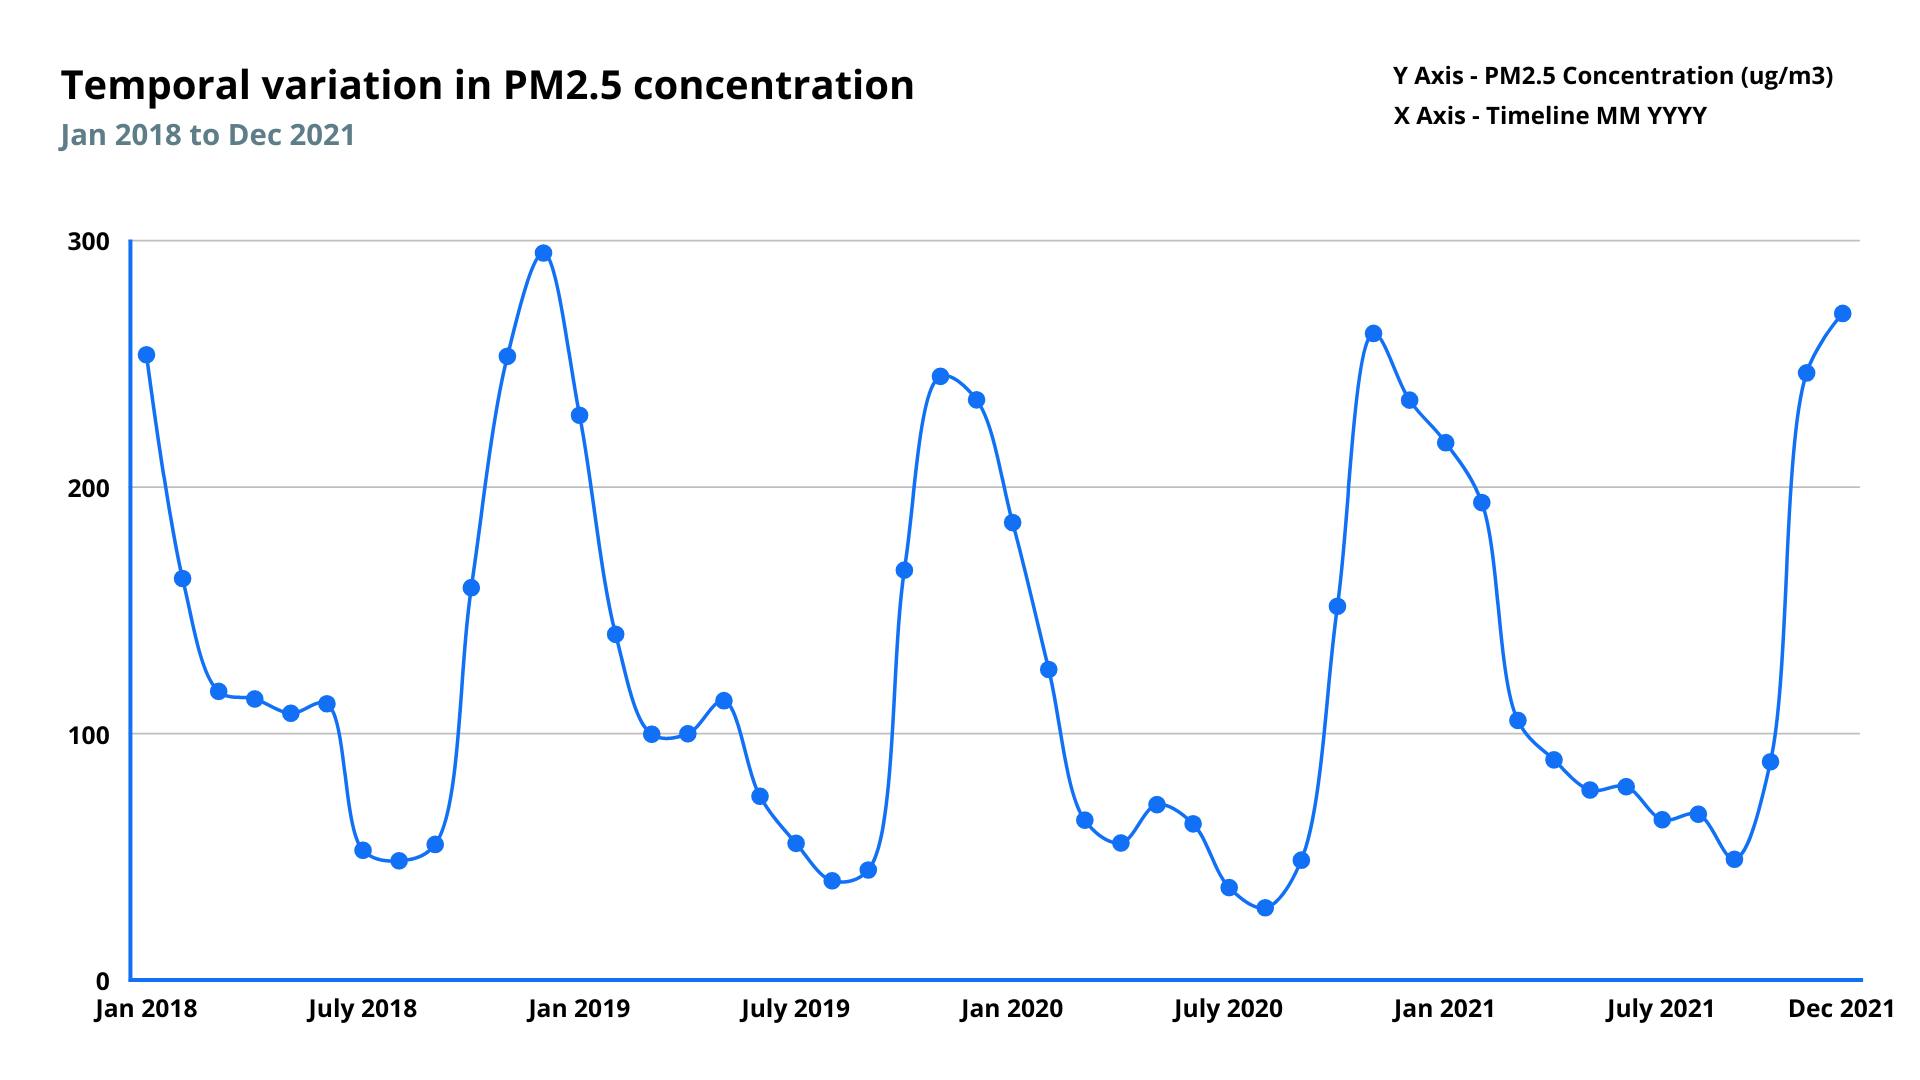 PM2.5 levels variations over time as observed by BAM at RK Puram, Delhi